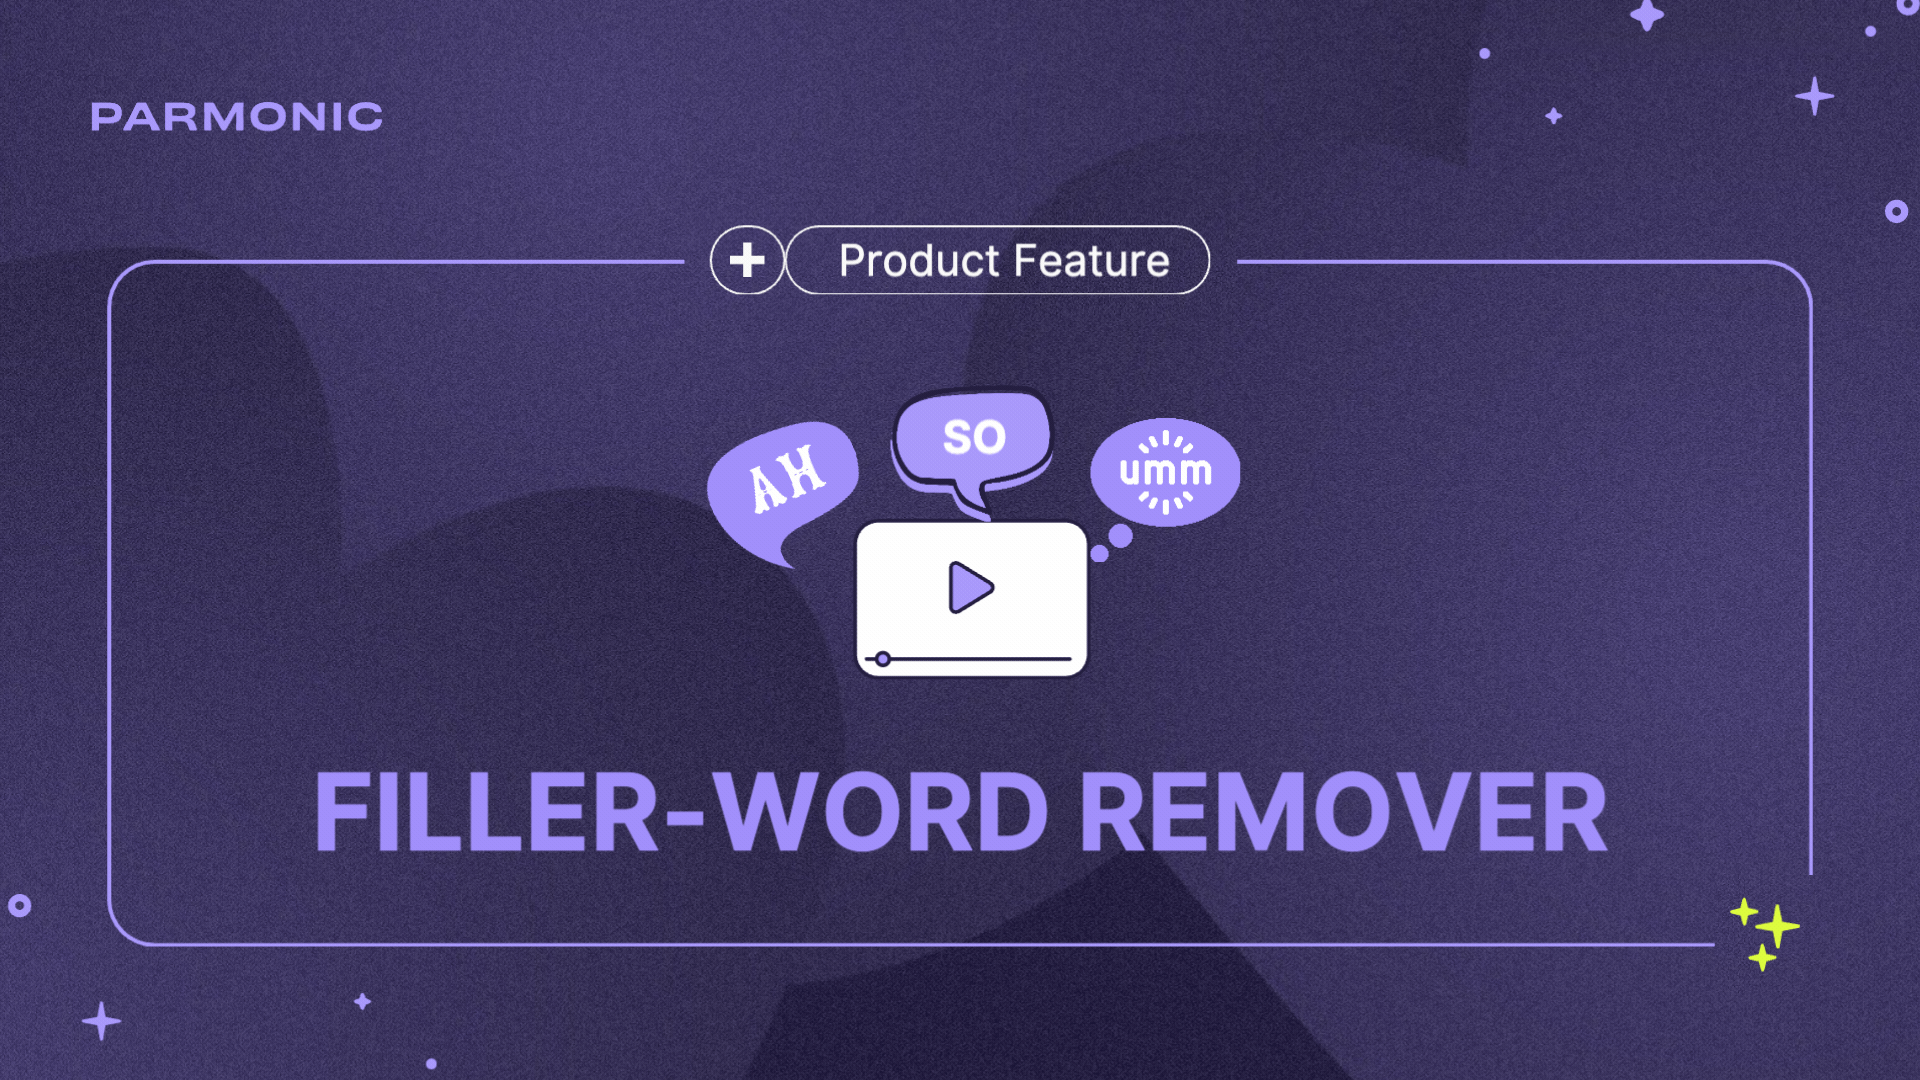 Cut the Fluff: Instantly Remove Filler Words from Your Videos